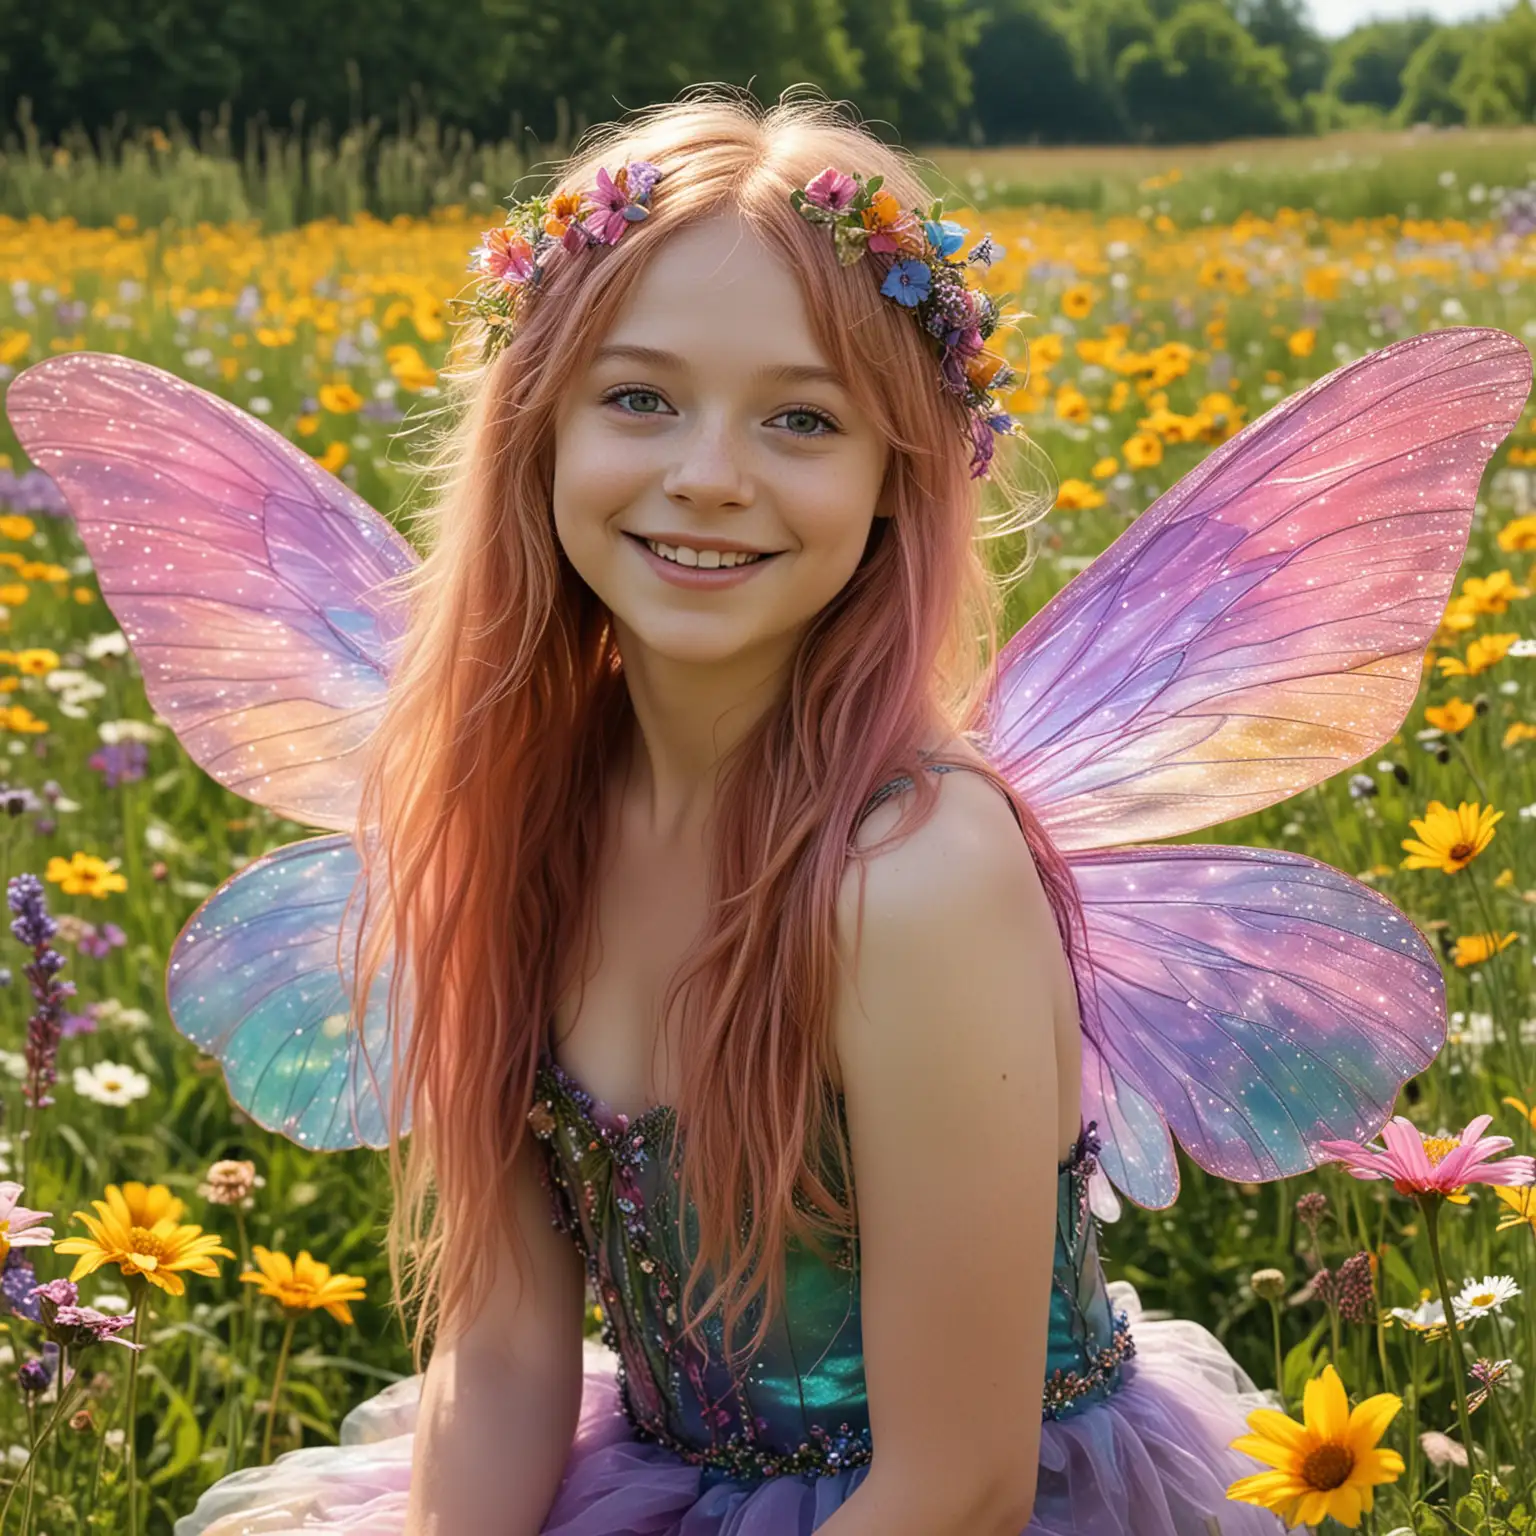 Joyful Fairy Girl with Iridescent Wings in Colorful Meadow